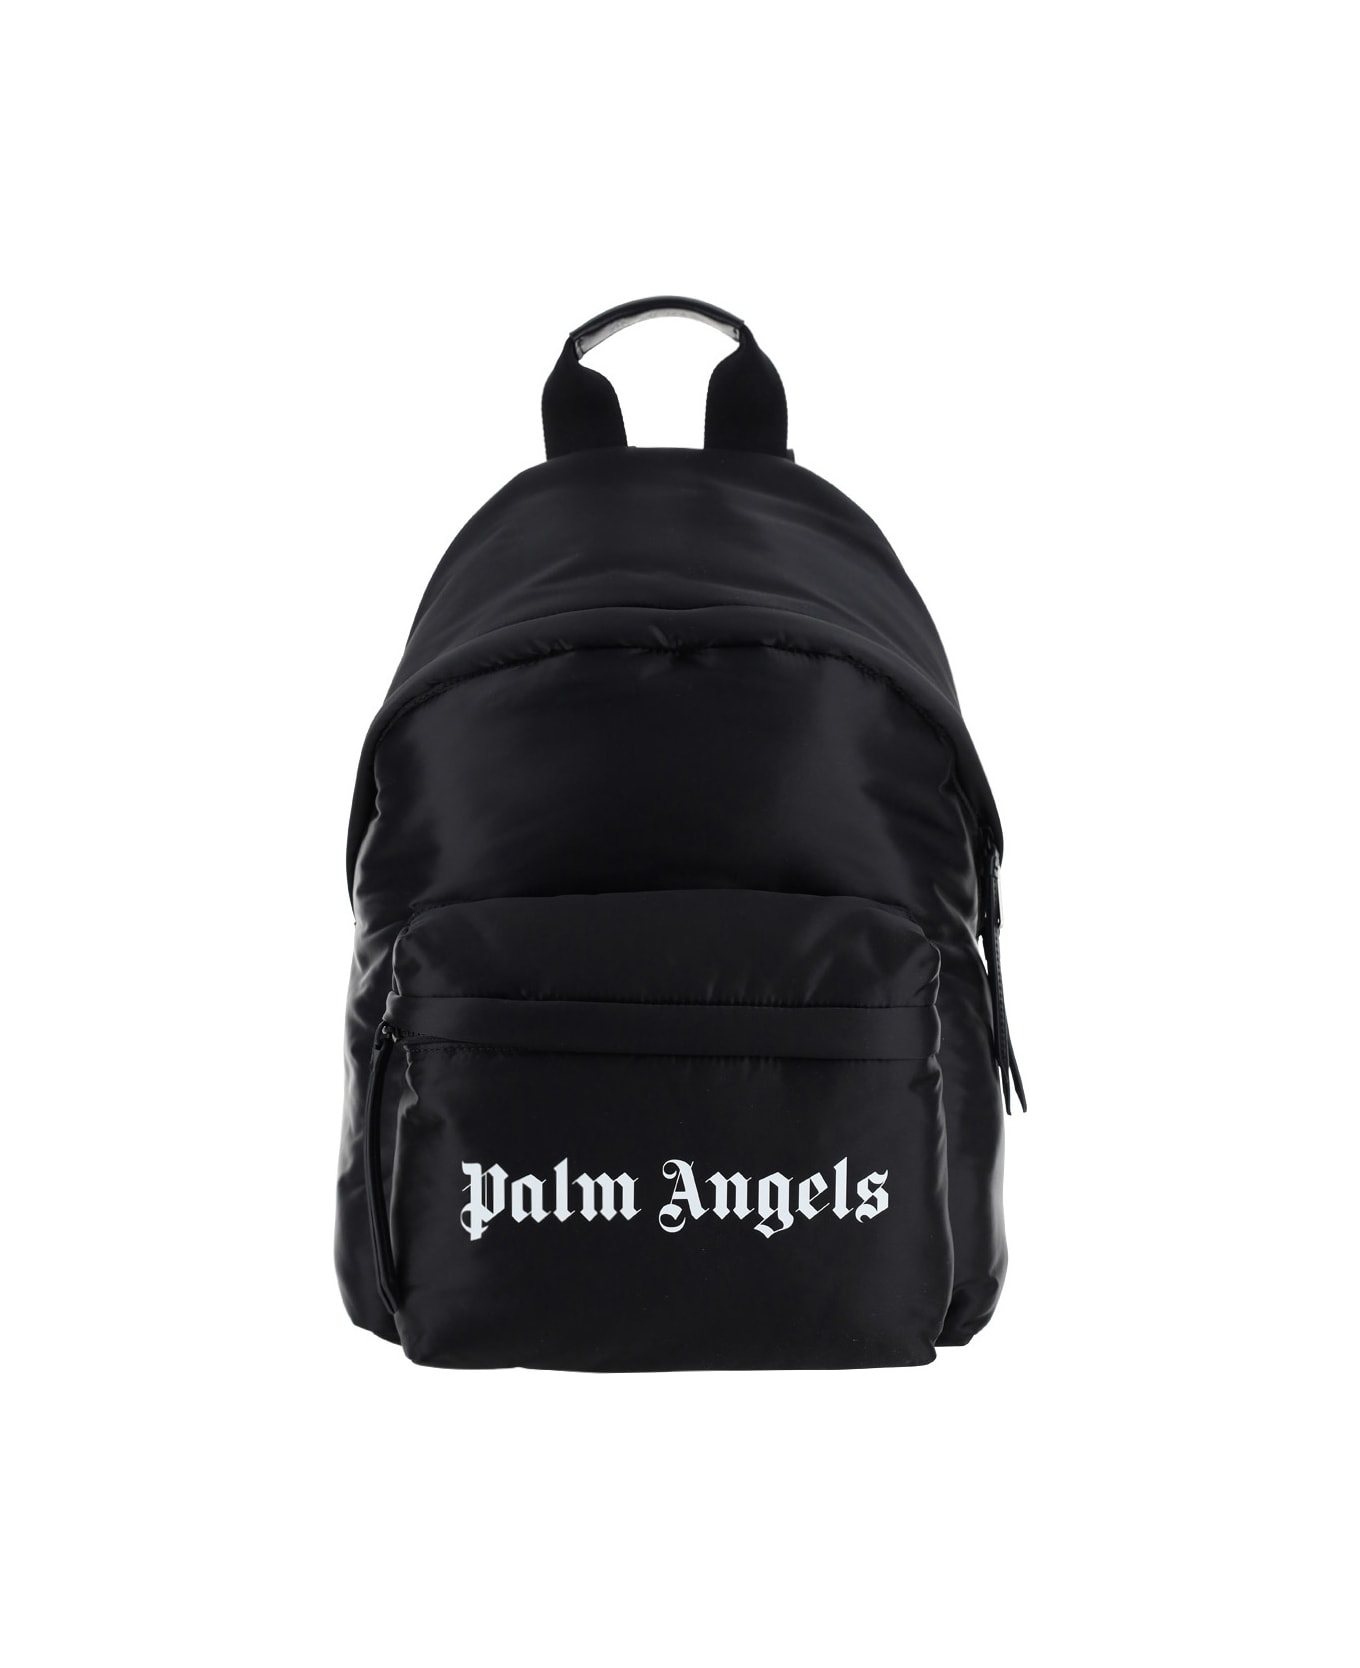 Palm Angels Backpack - Nero/bianco バックパック